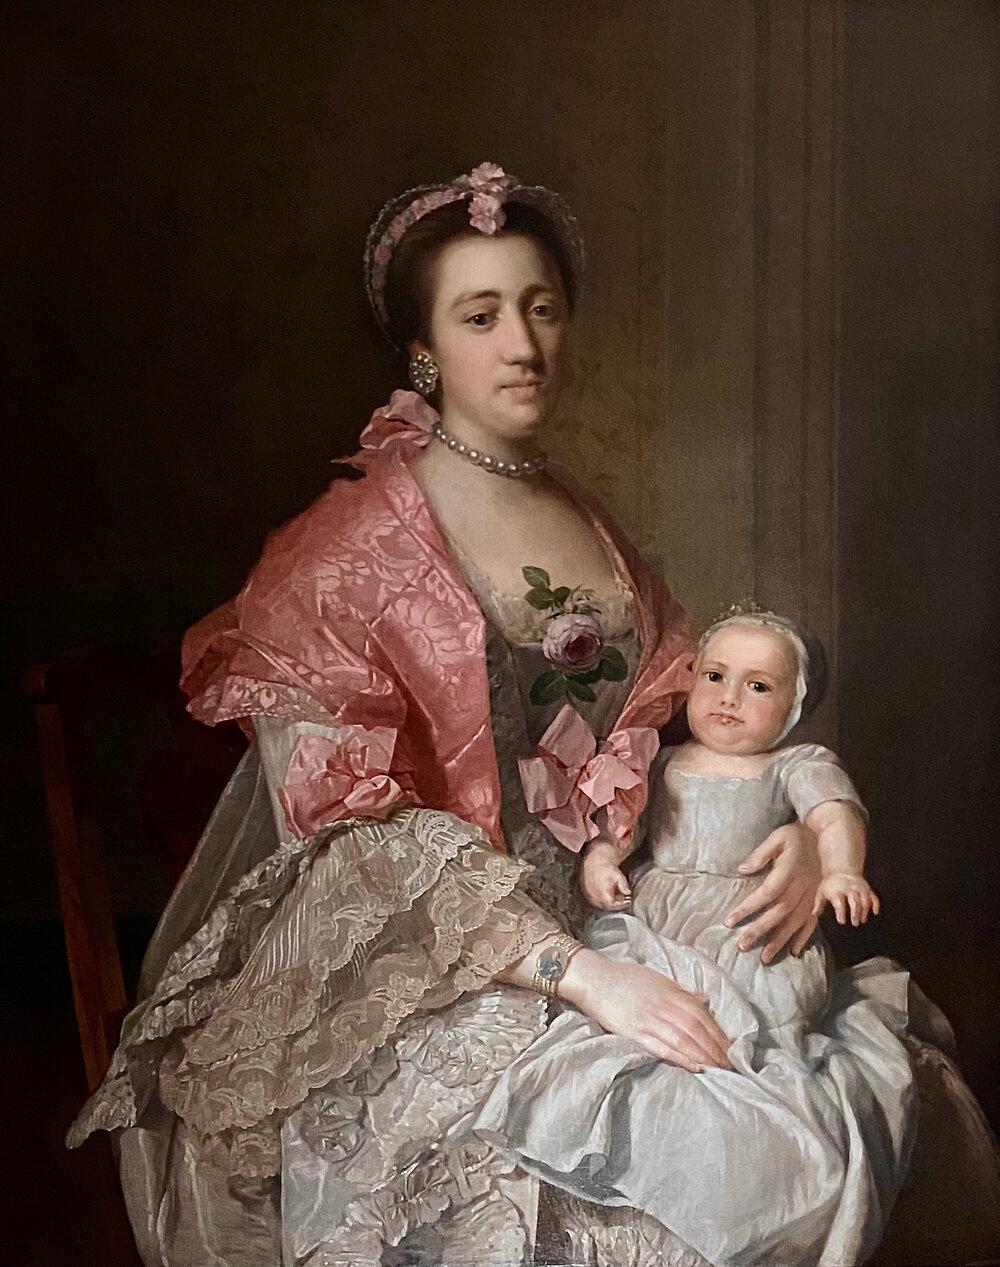 18th Century English Portrait of a Lady and her Child. - Painting by Studio of Sir Allan Ramsay